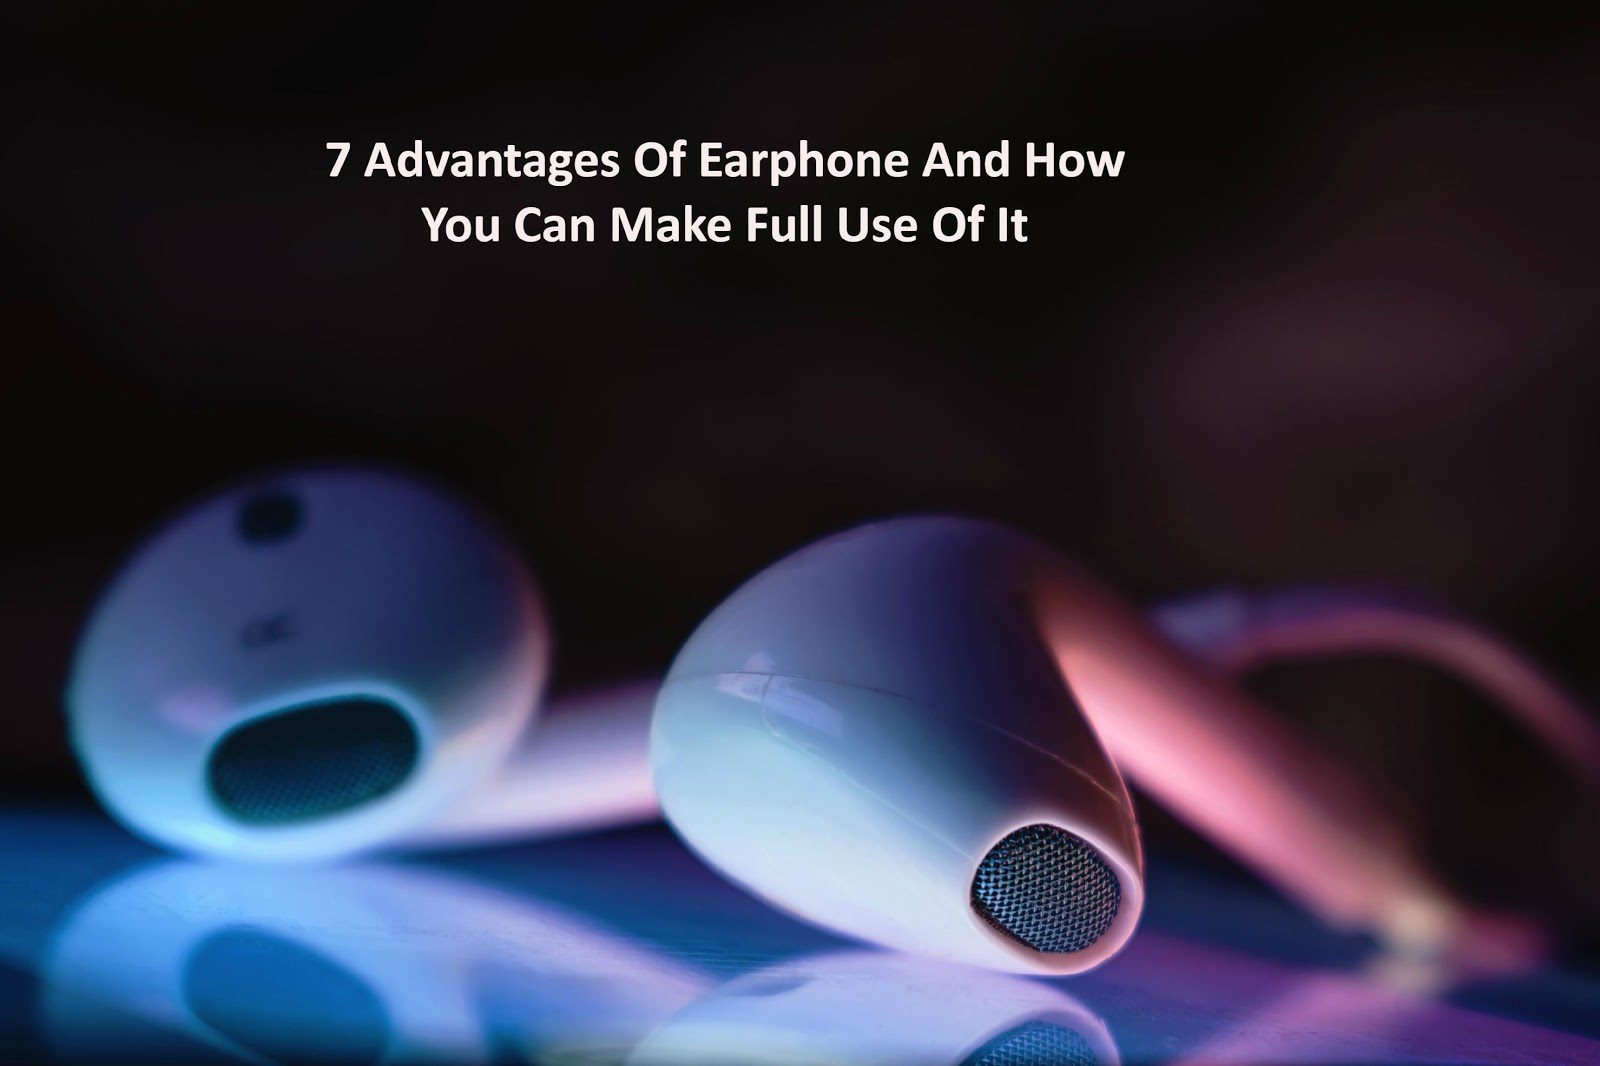 7 Advantages of Earphones & How to Make the Most Out of it